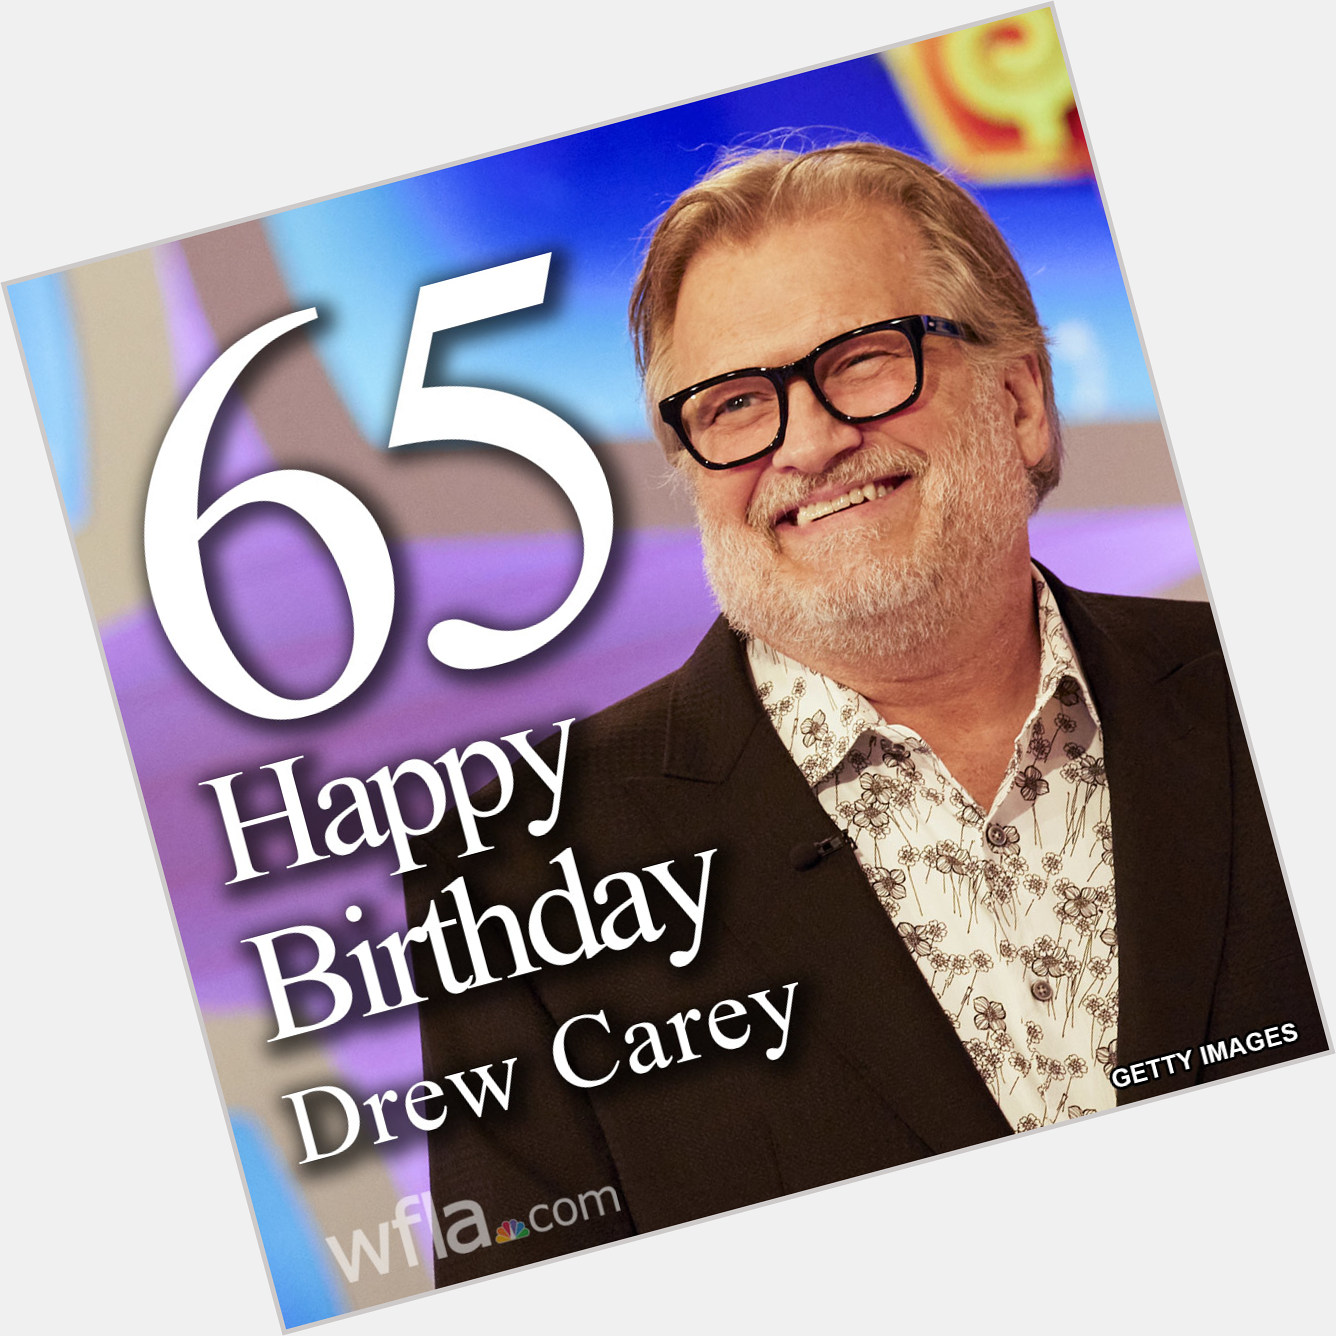 HAPPY BIRTHDAY, DREW CAREY The host of \"The Price is Right\" turns 65 today!  